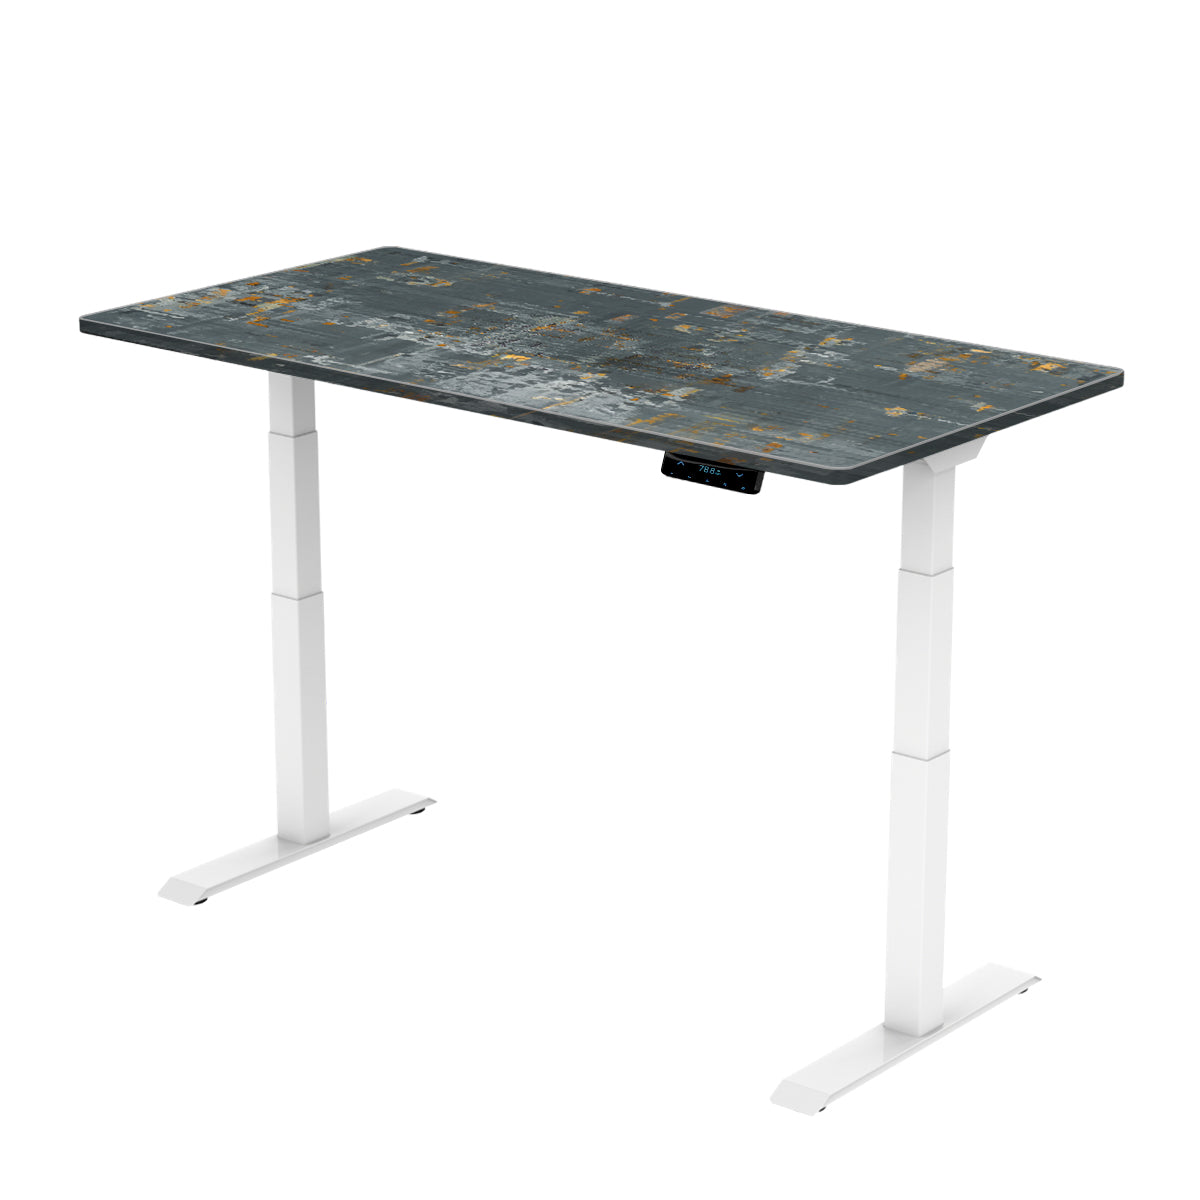 (READY STOCKS) Ergoworks Signature Standing Desk, Formica Laminate 0.8mm Tabletop